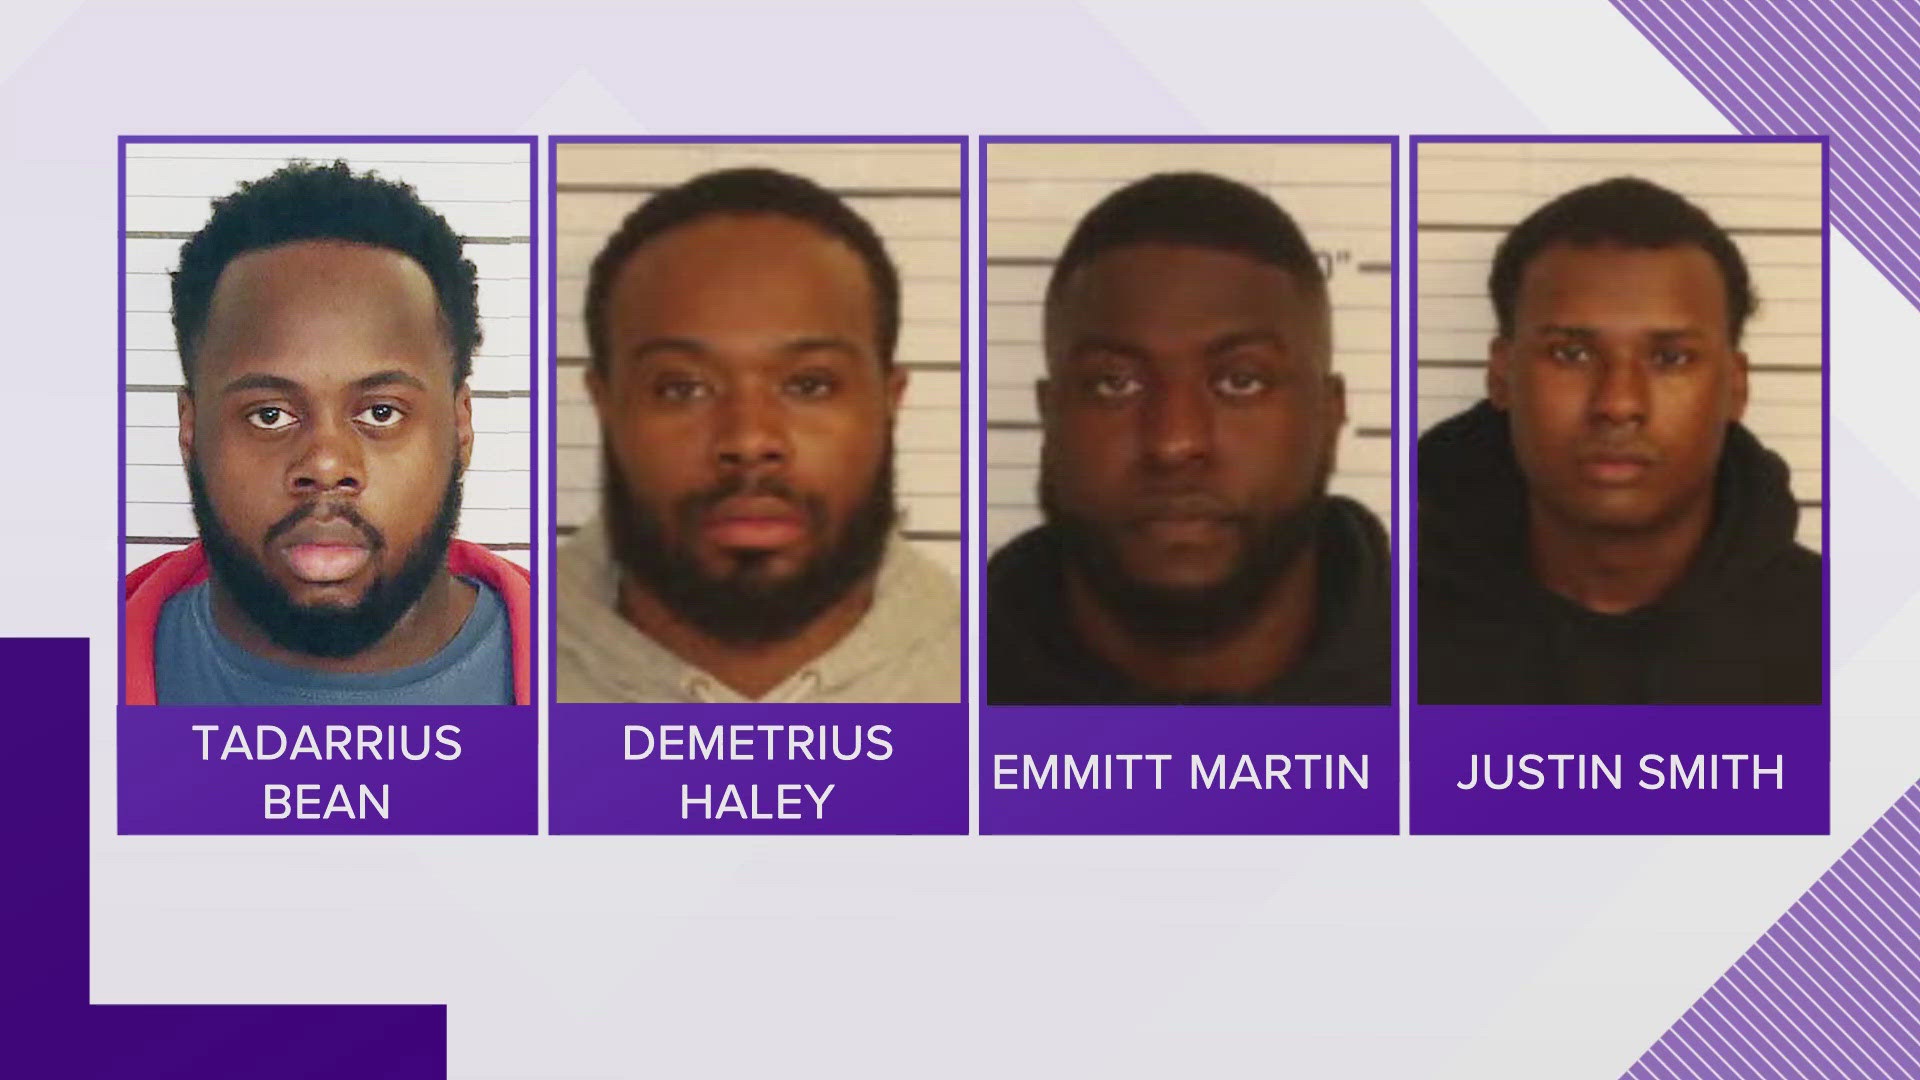 Tadarrius Bean, Justin, Smith, Haley, and Emmitt Martin have pleaded not guilty to federal charges.